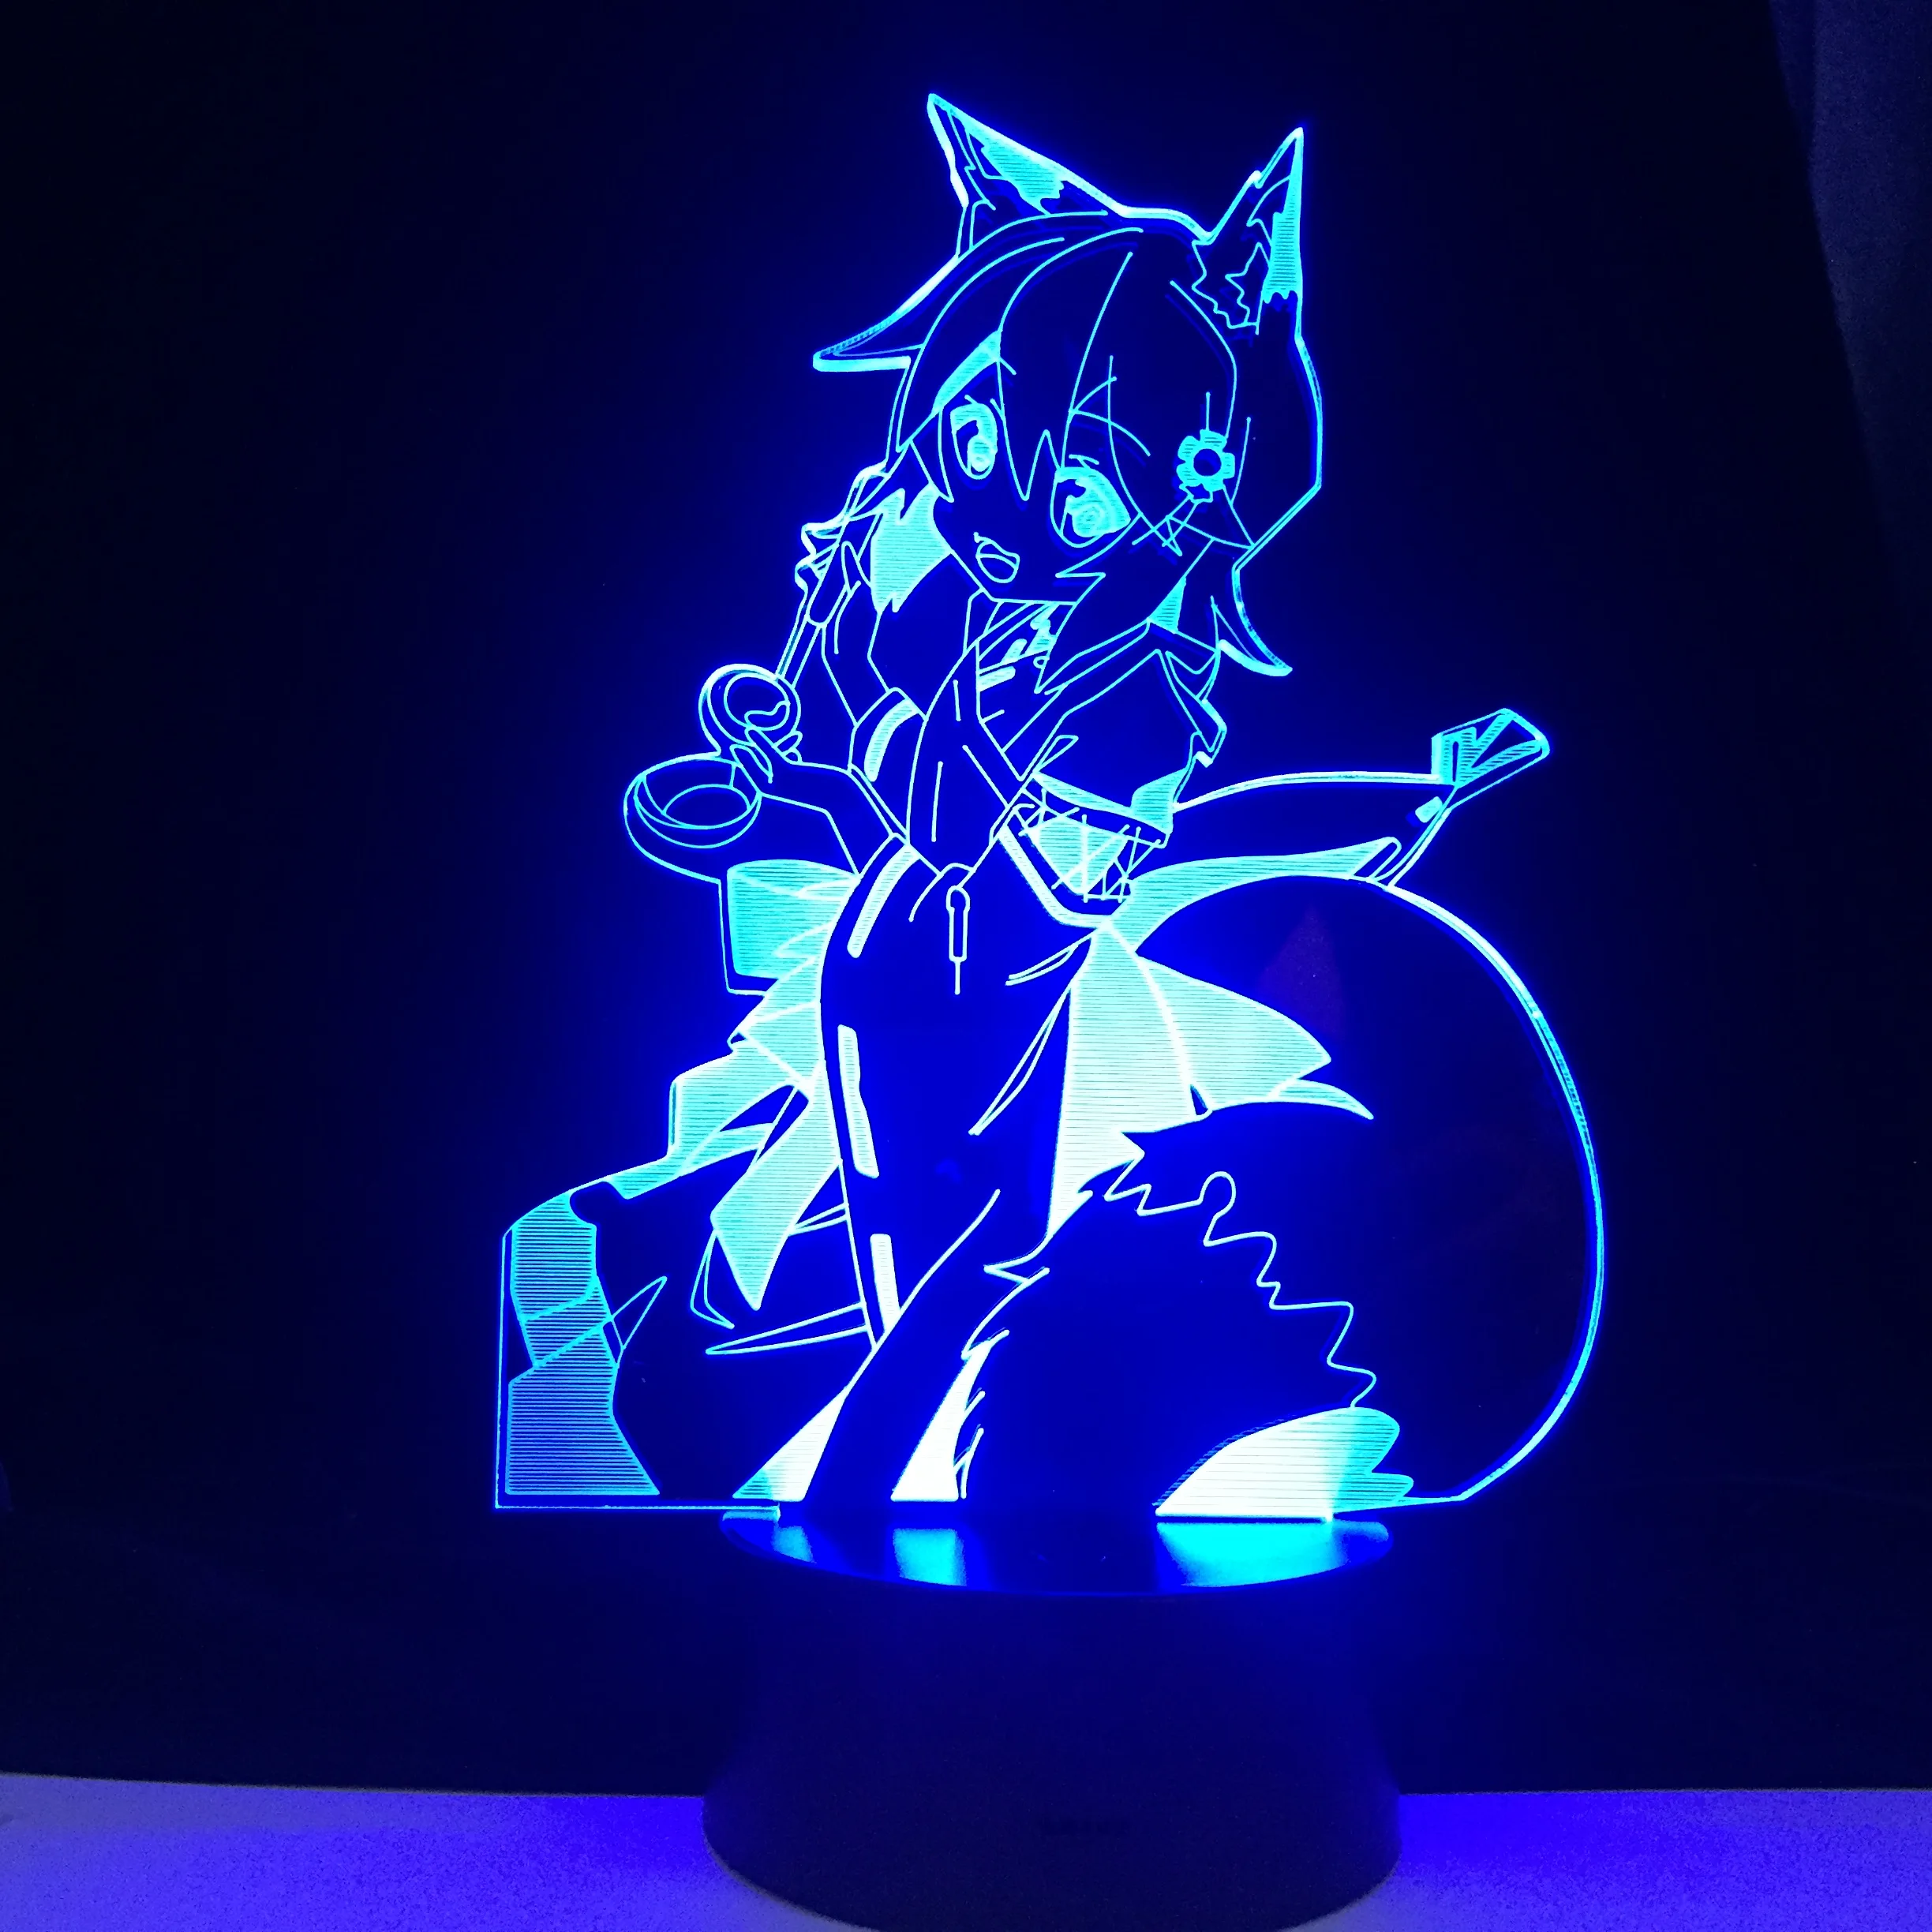 Buy The Helpful Fox Senko-san Anime 7 /16 Colors 3d Led Night Light for Children Bedroom Decoration Dropshipping Remote Control on